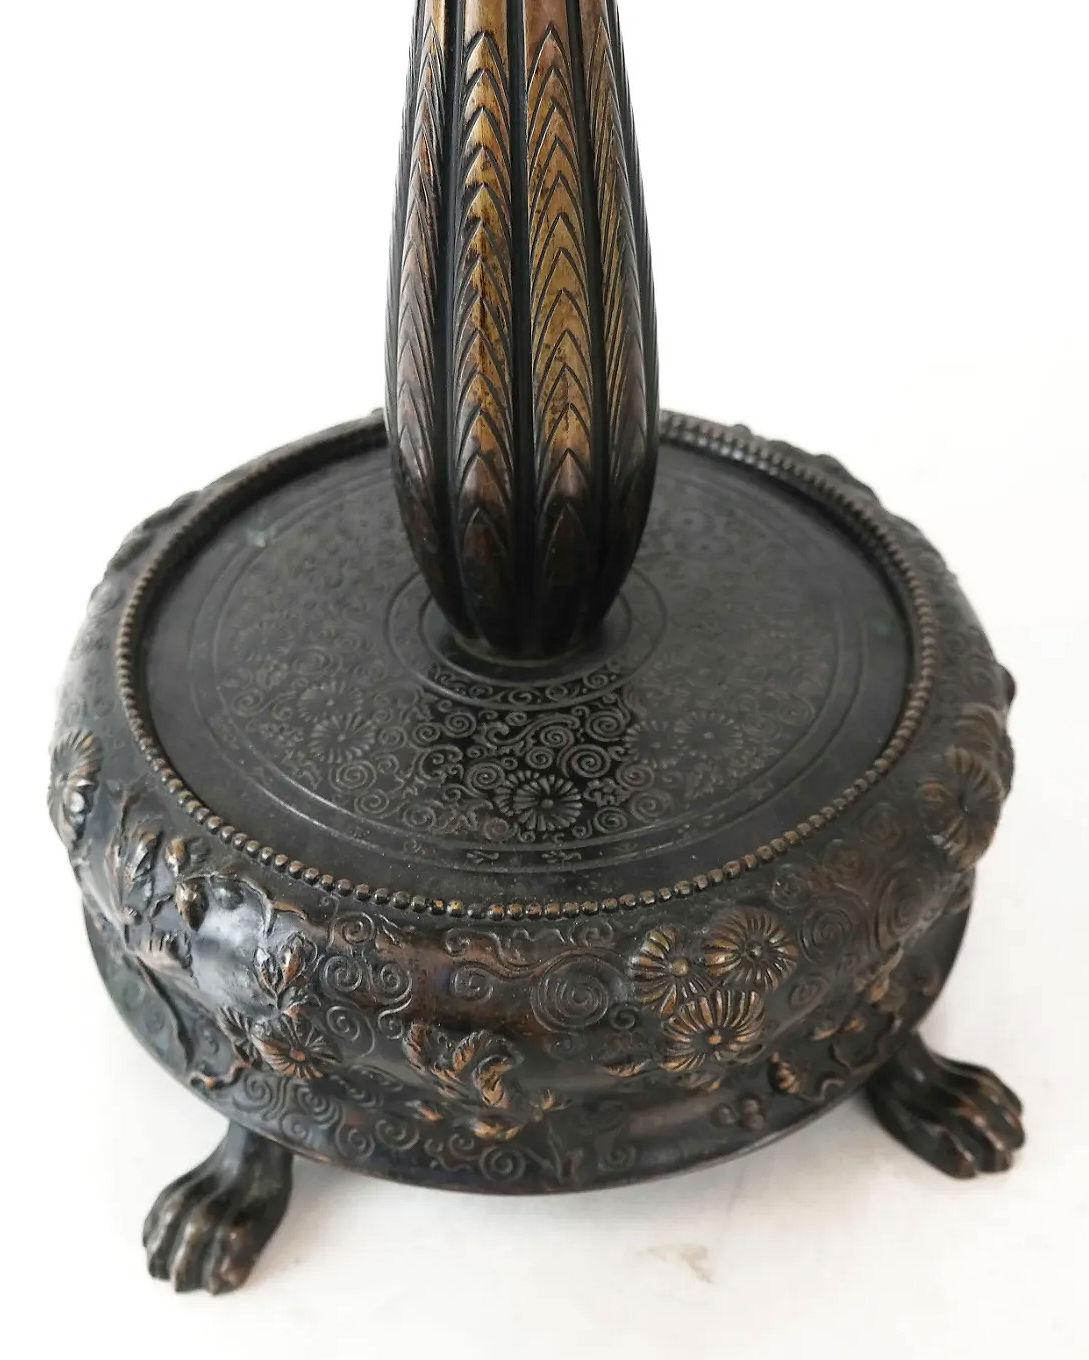 Patinated Bronze Lamp in Manner of Armand-Albert Rateau Attributed to Caldwell 5